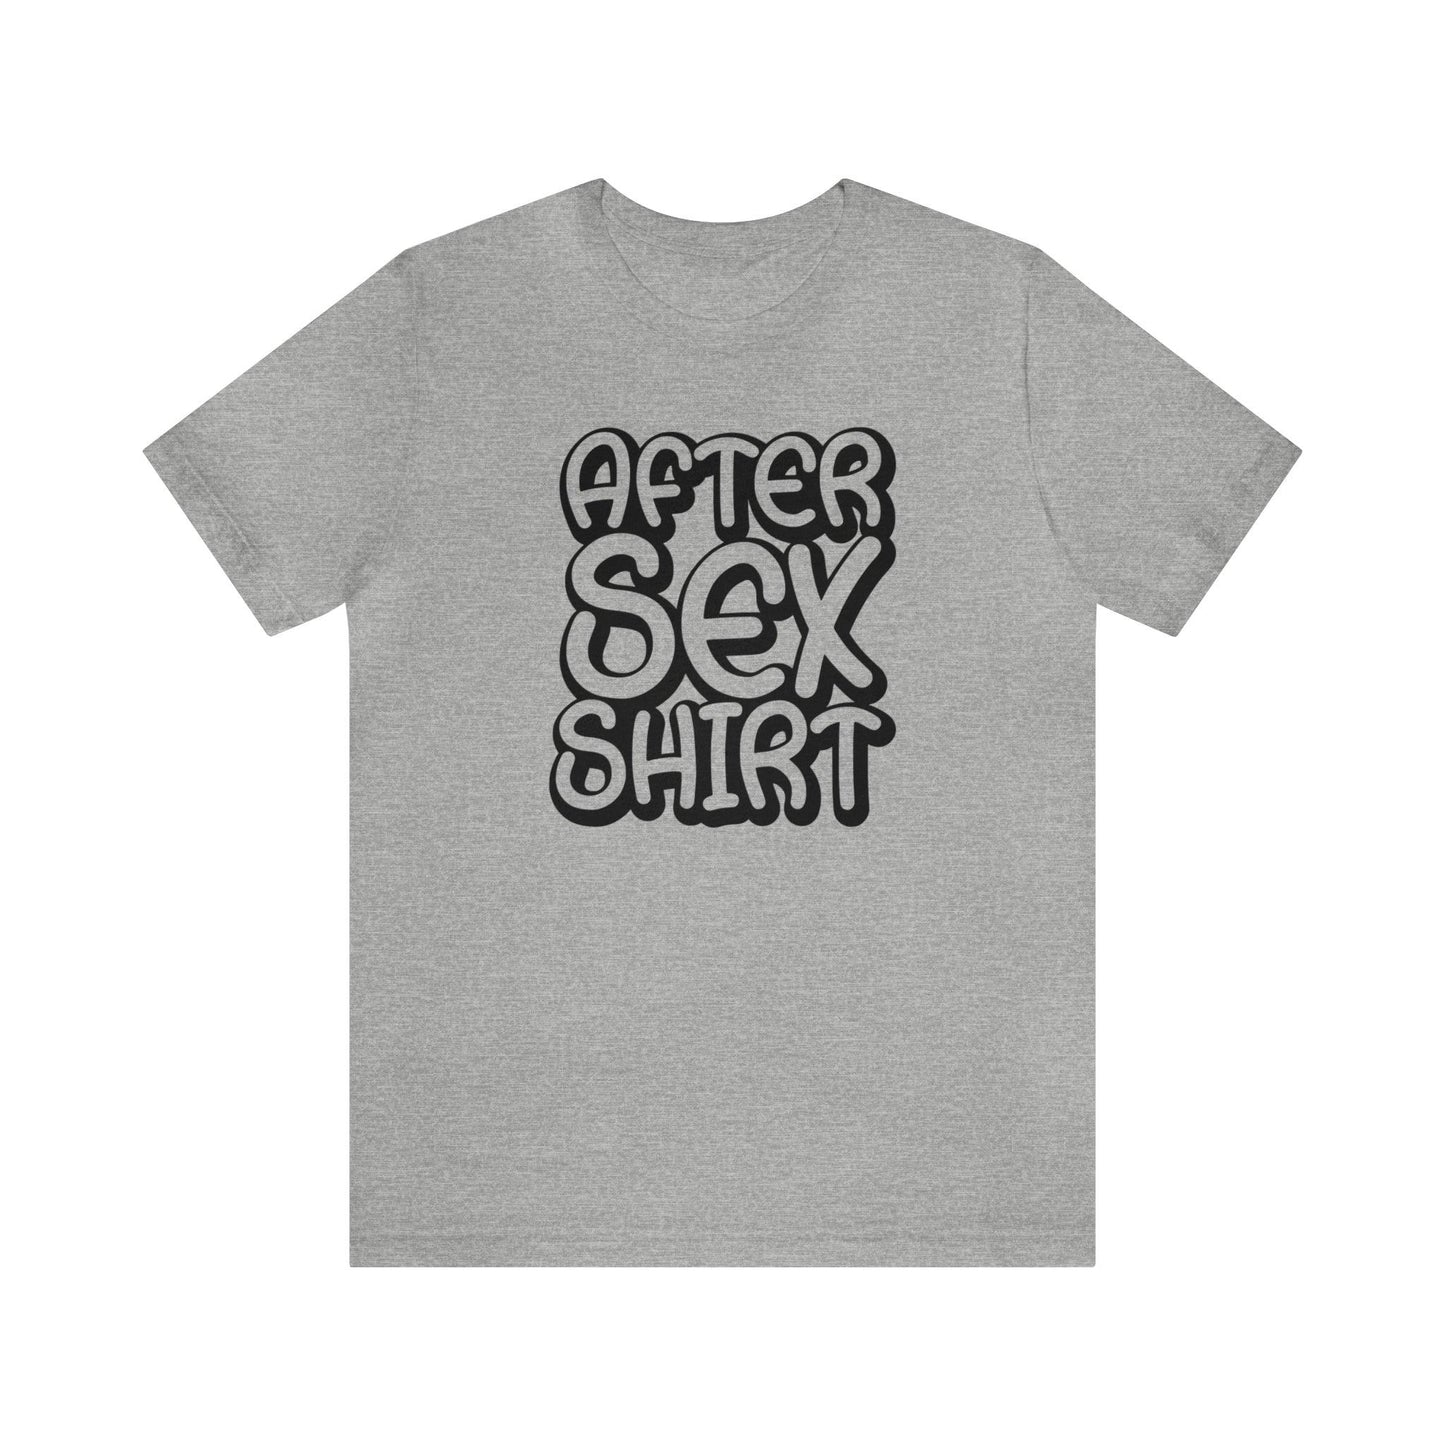 After Sex Shirt - Wicked Naughty Apparel